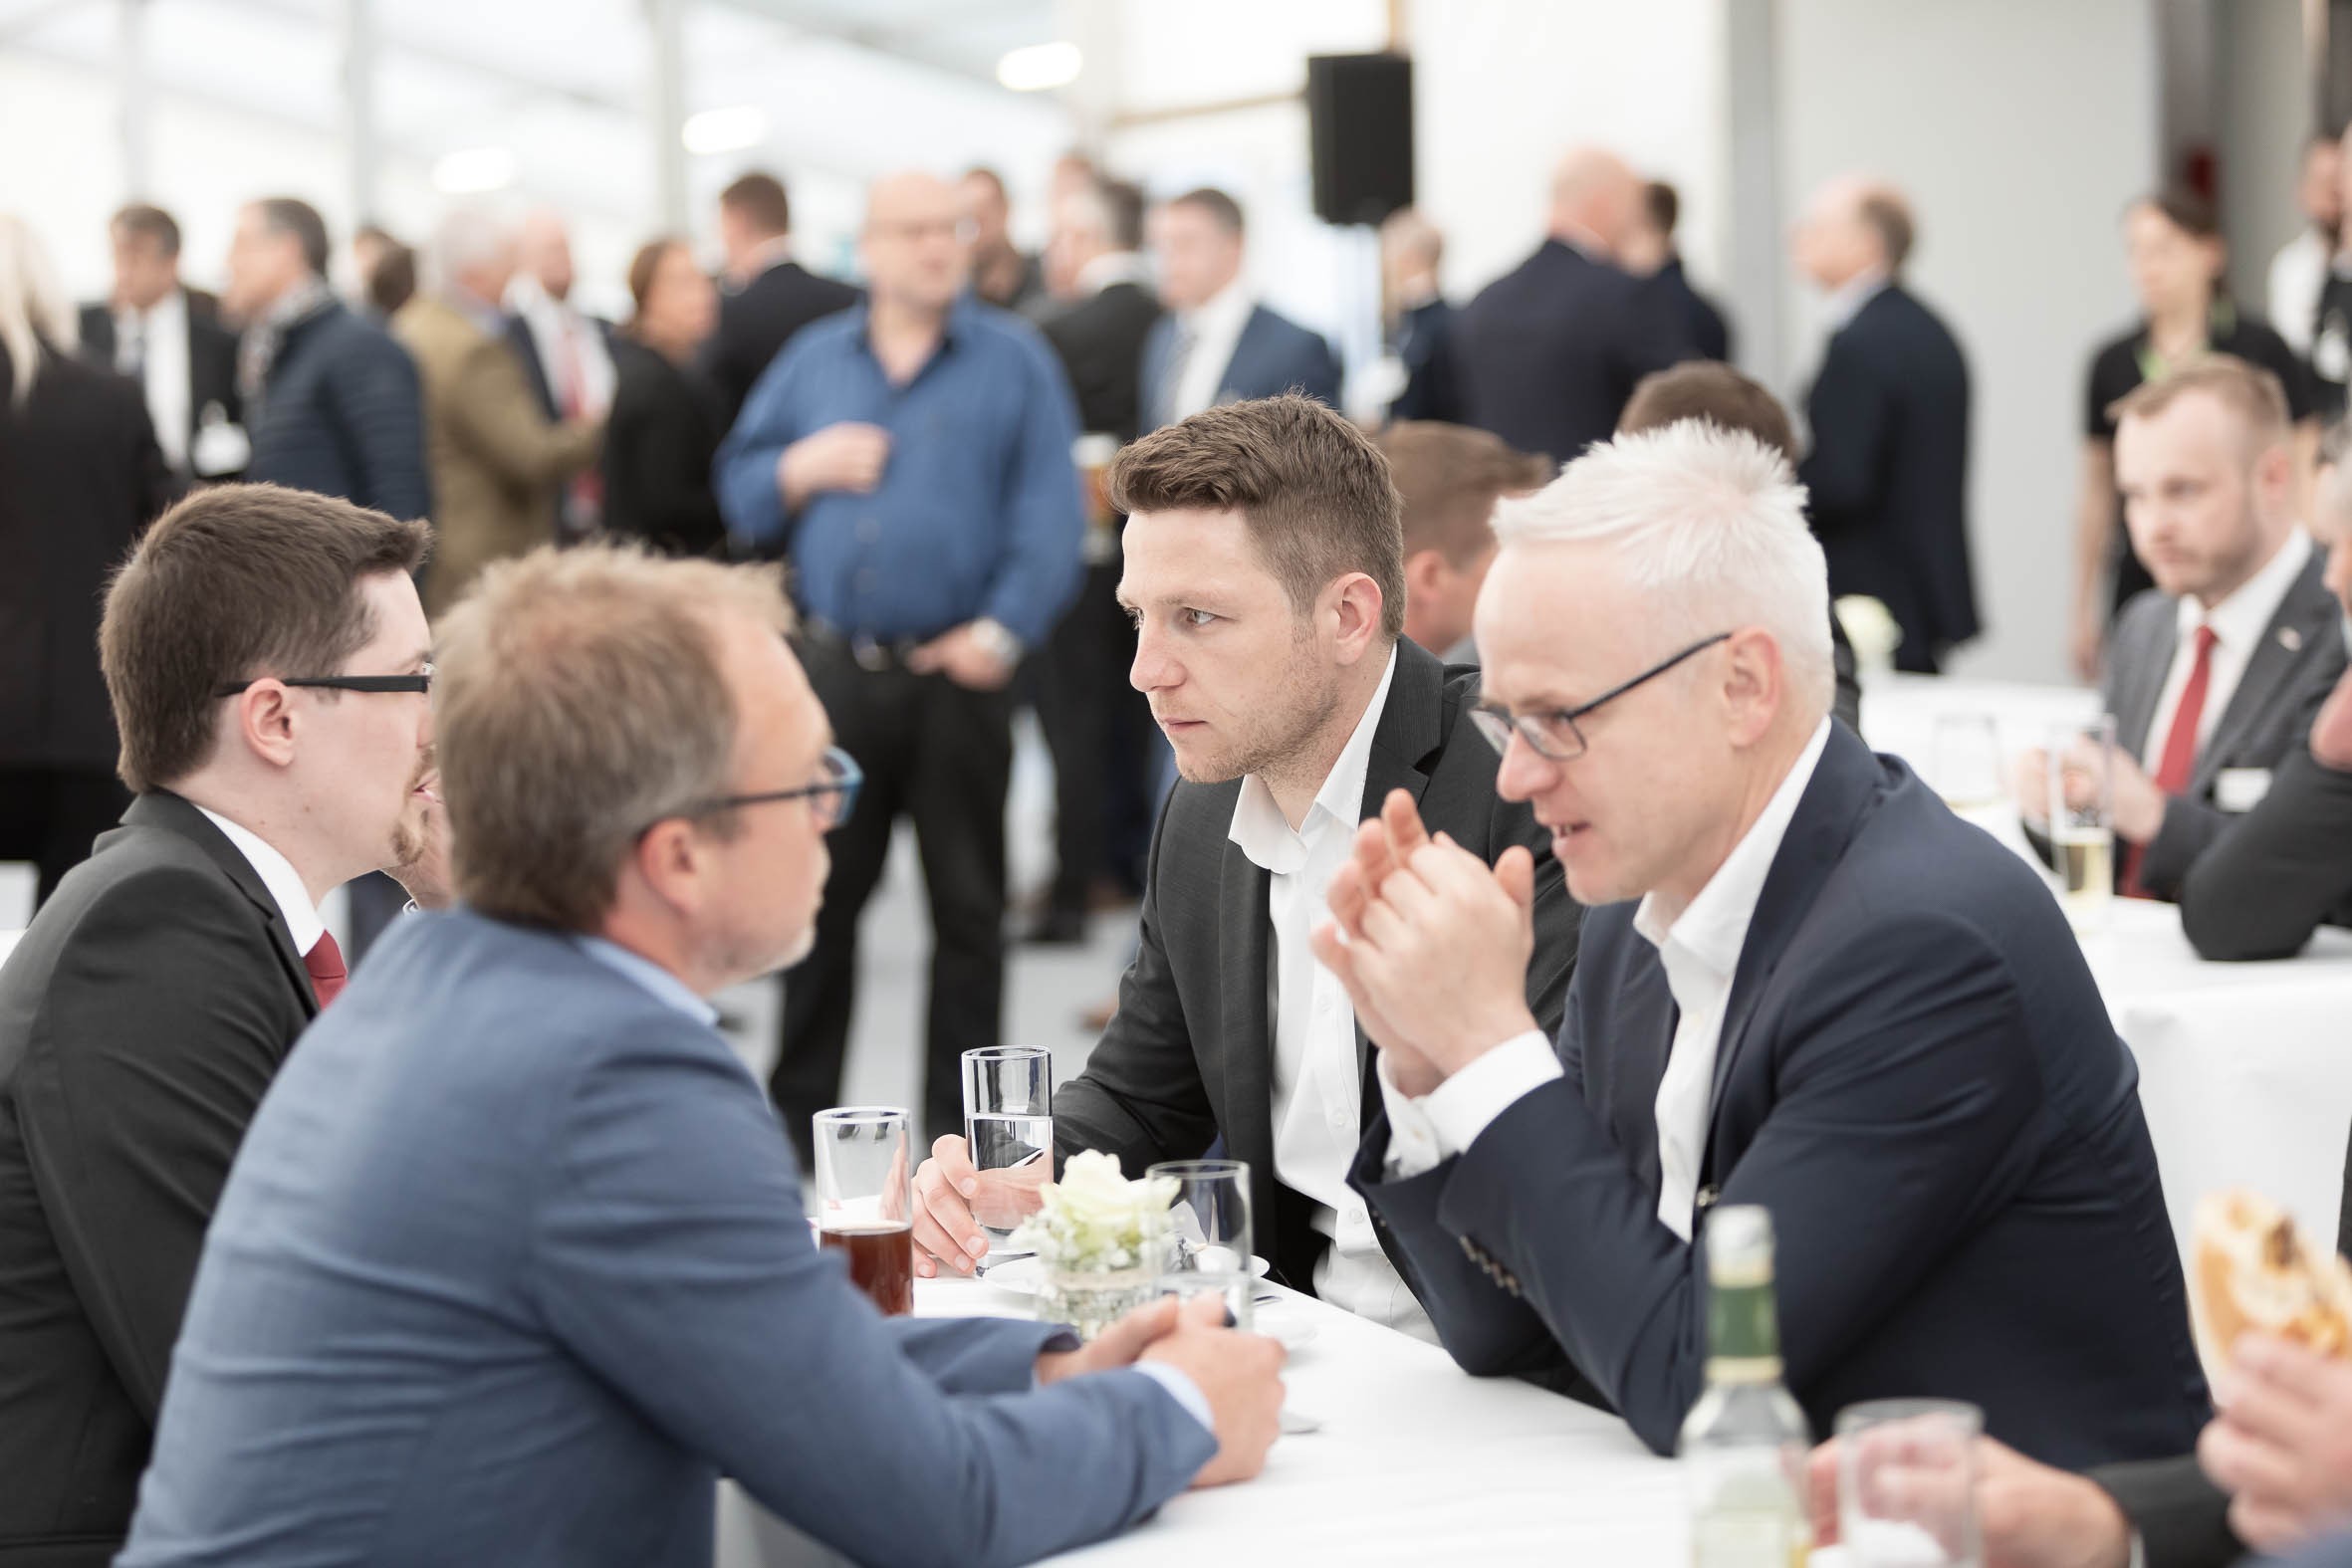 Look back on the OPEN HOUSE 2019: The well-established industry event is finally able to come to life again, with a live event at the CHIRON Group premises in Tuttlingen, Germany.